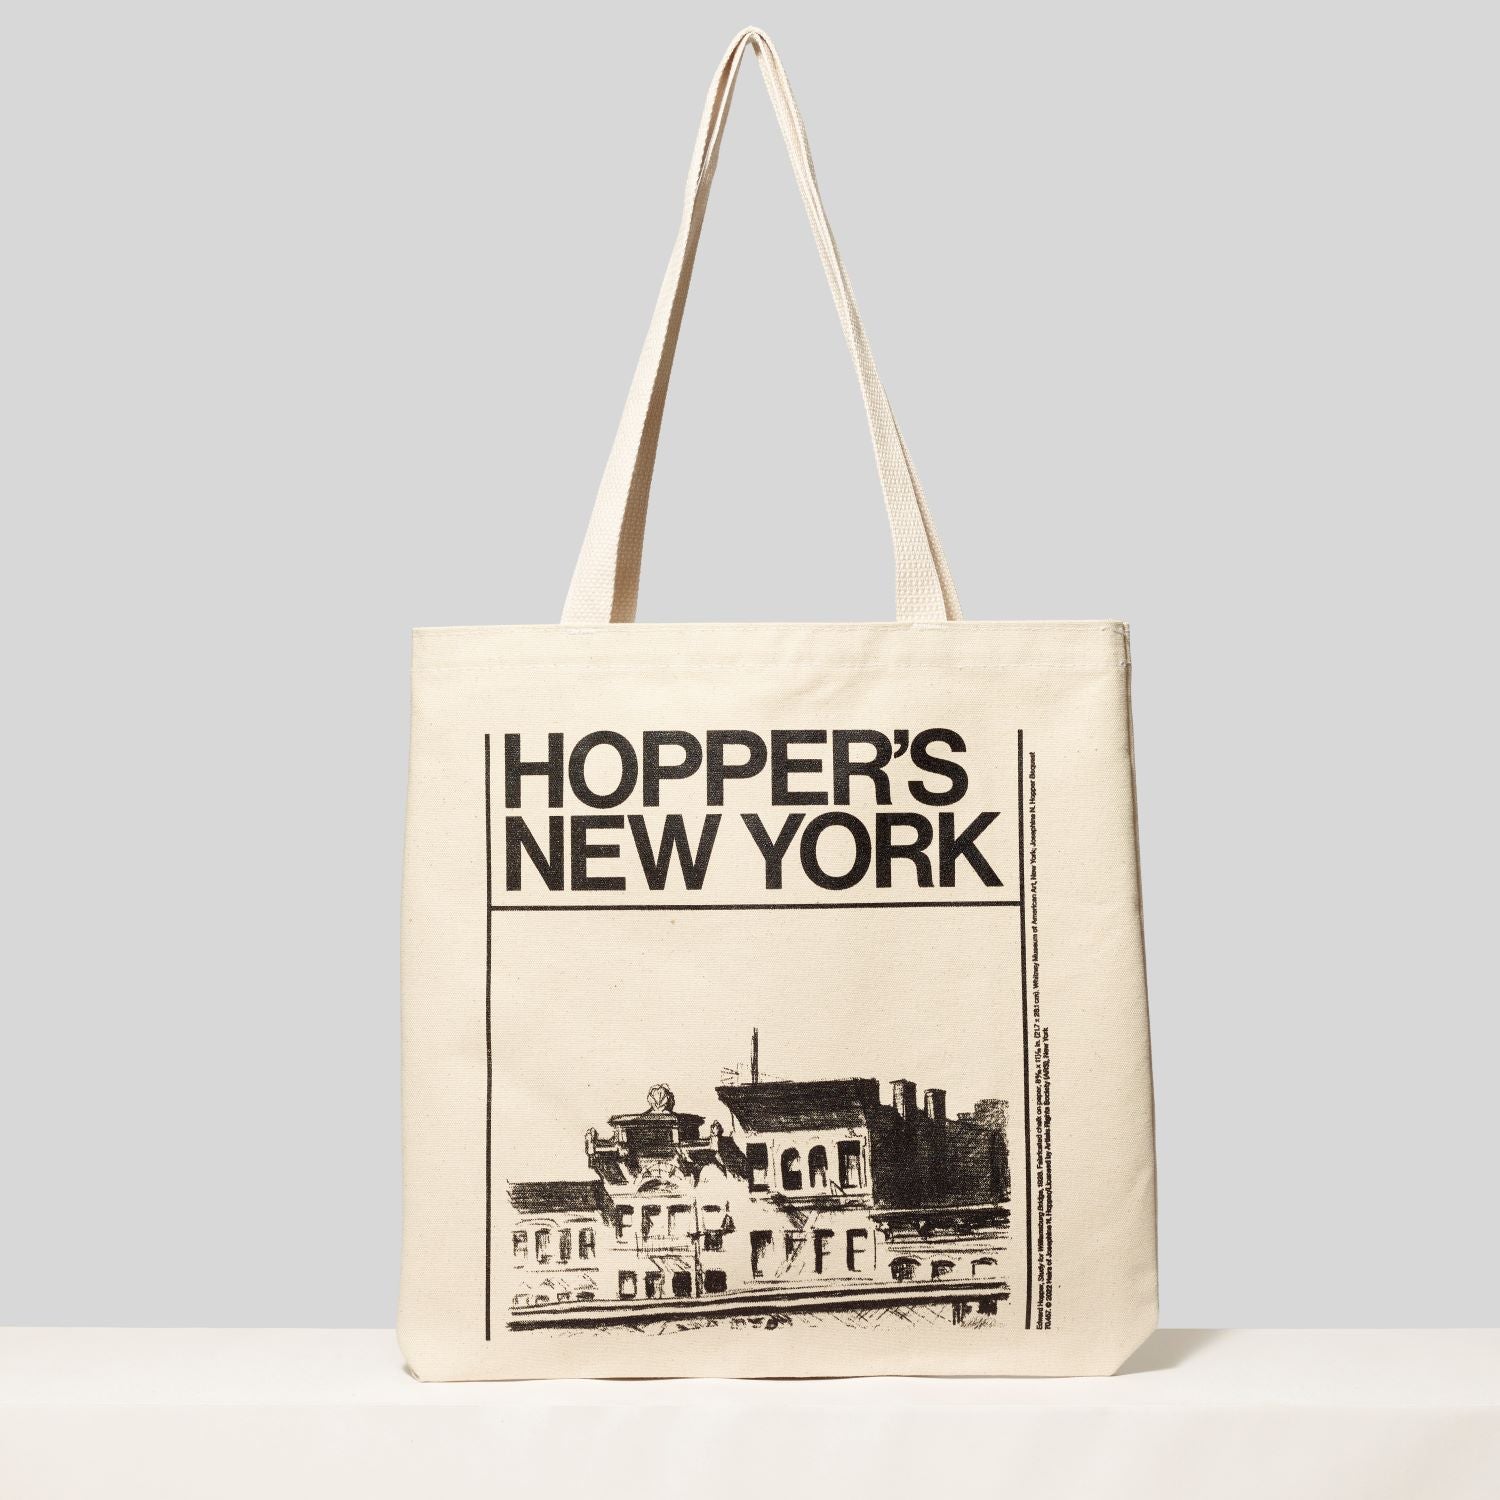 100% cotton canvas tote featuring Hopper's New York. Measures 13.75" H x 13" L